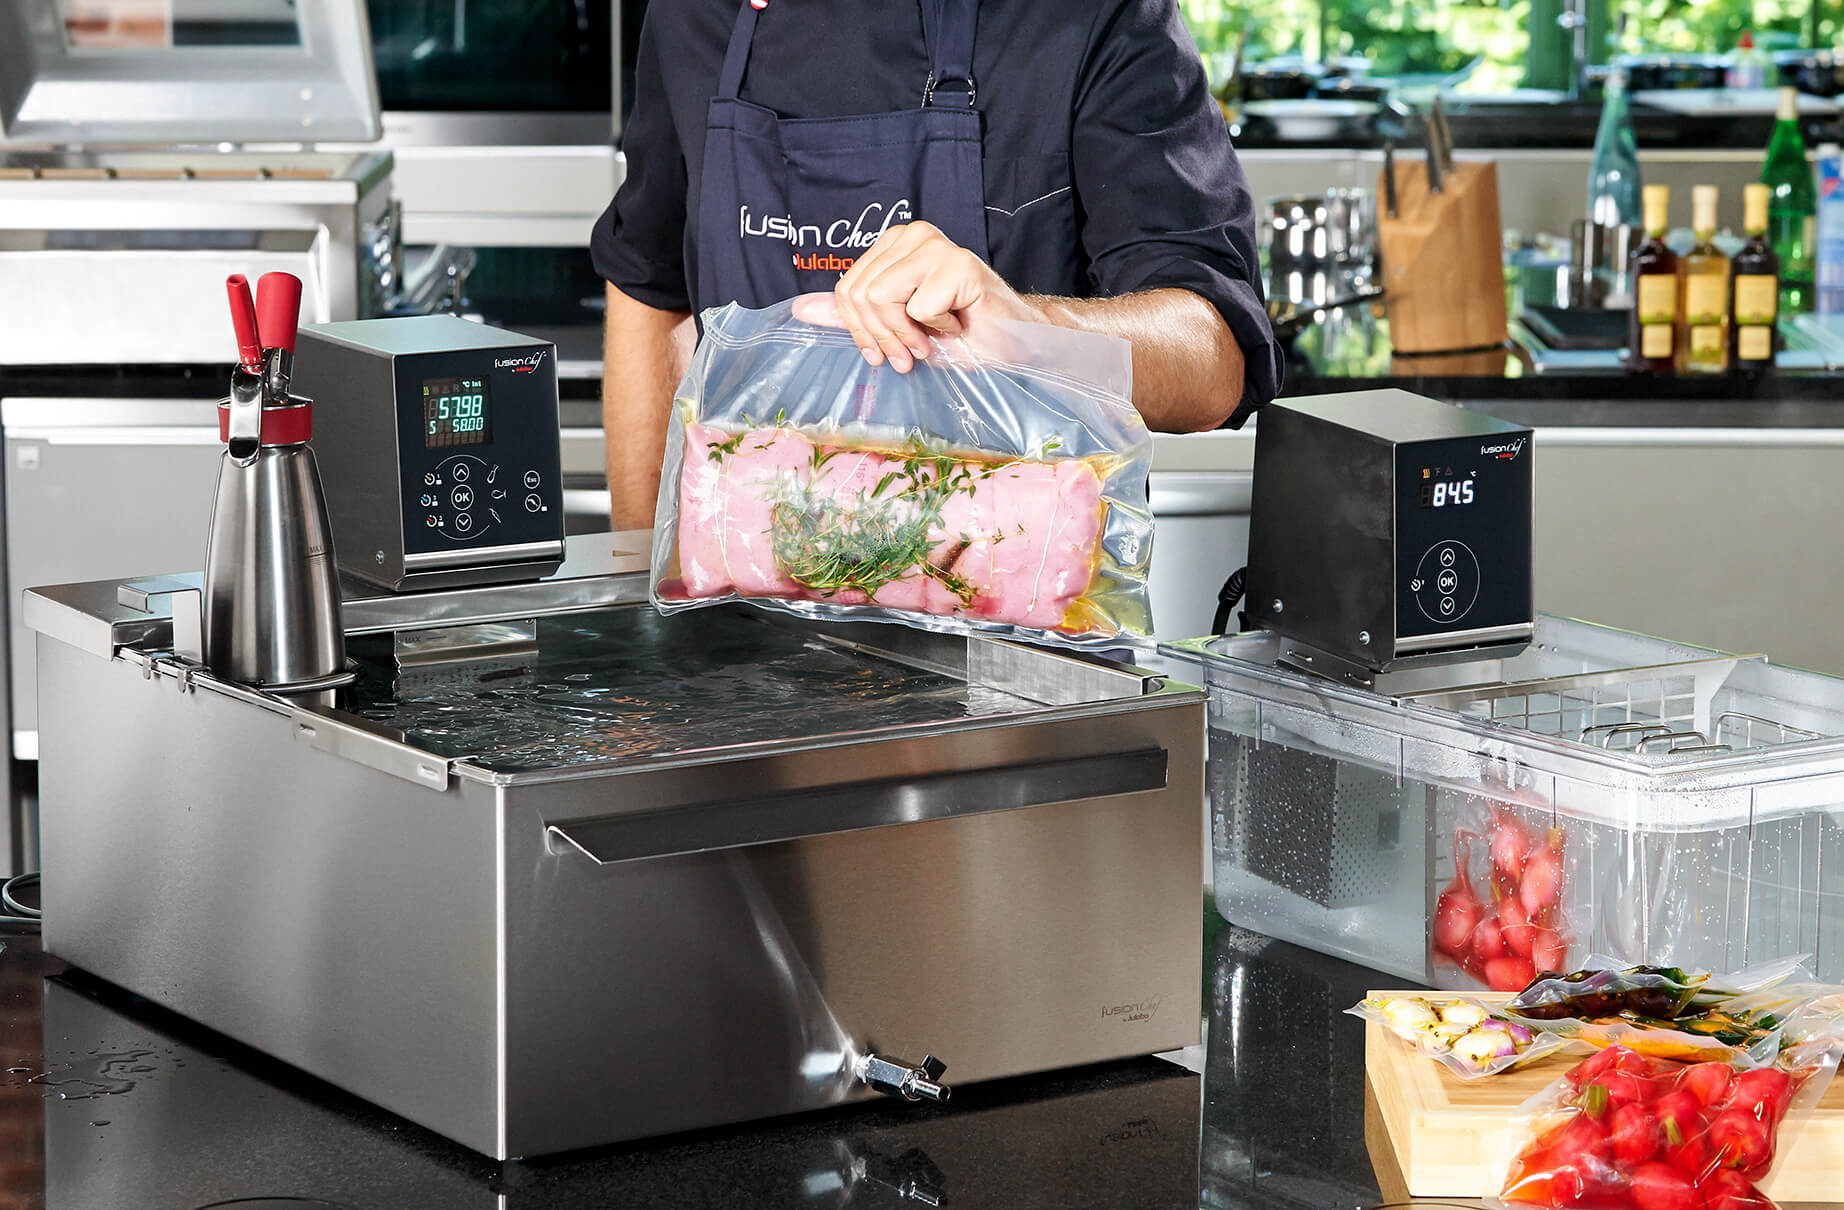 Sous Vide Products are Gaining Popularity Among Commercial Kitchens Everywhere